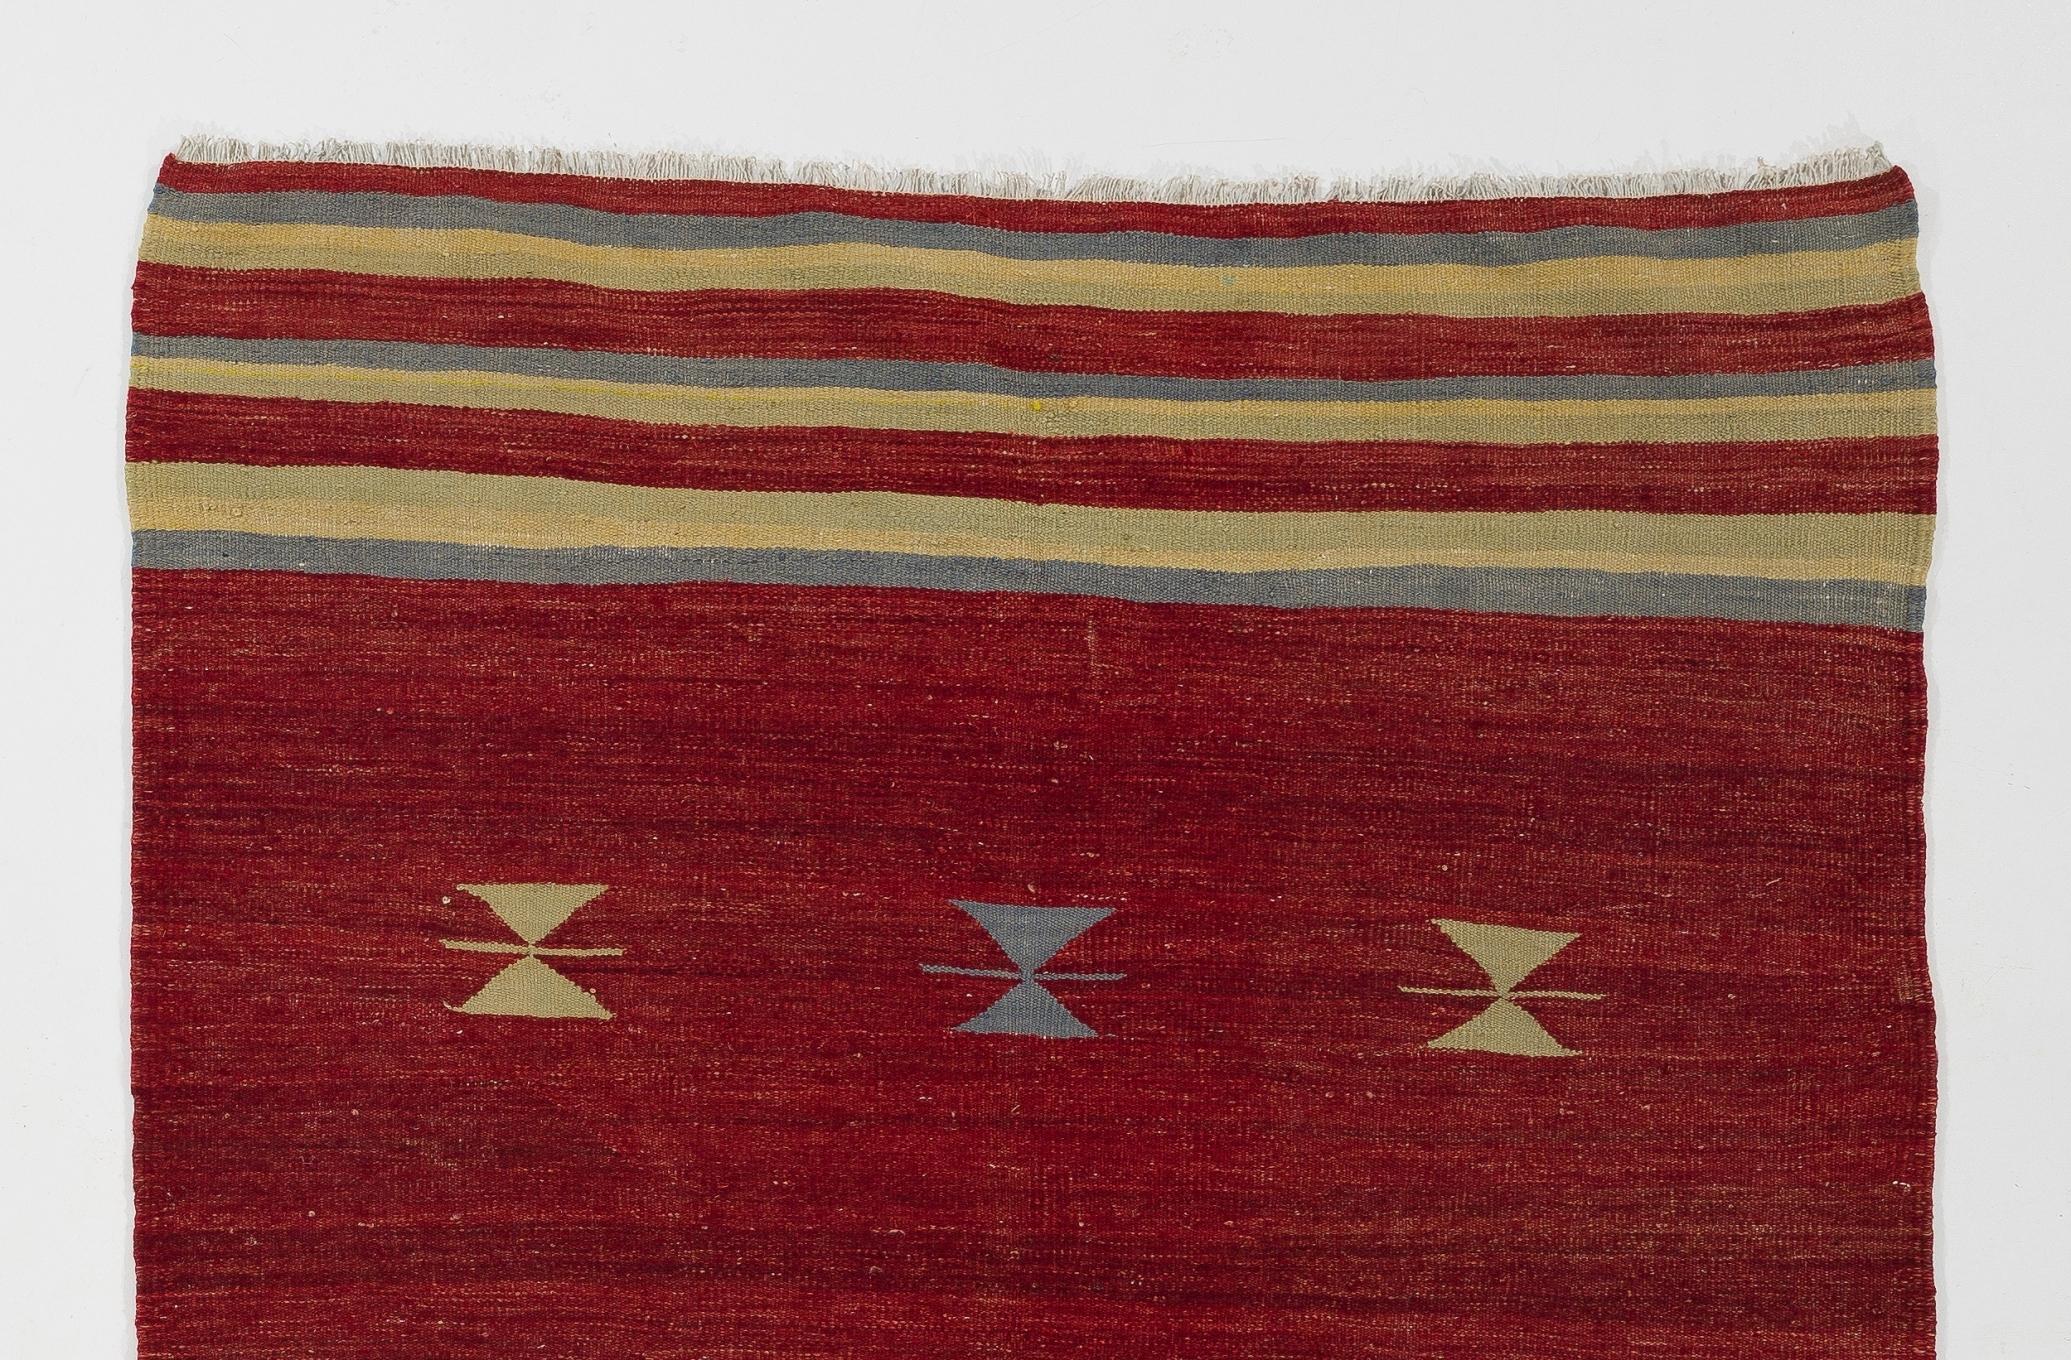 A simple yet beautiful wool rug handwoven by the nomadic tribes in South Central Turkey. 
Very good condition, sturdy and clean. Ideal for both residential and commercial interiors. 
We can supply a suitable rug-pad if requested for extra